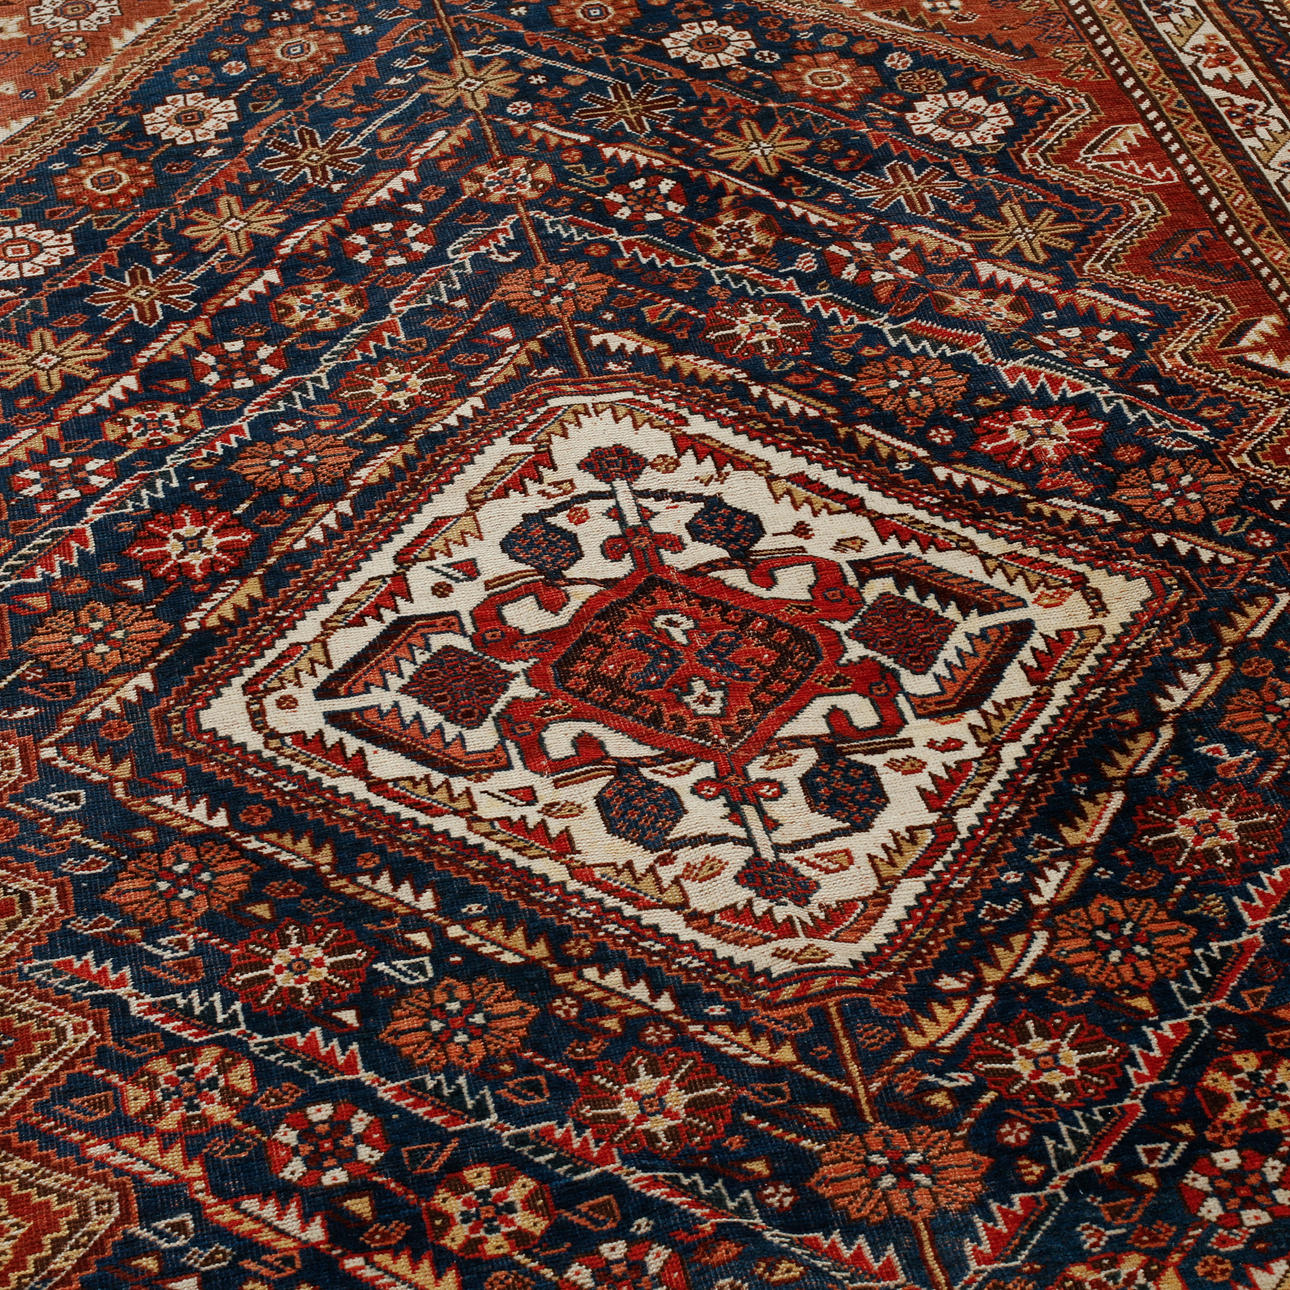 Antique Persian Gashgahi nomadic carpet, with 100% organic colors. Size 140 x 240 cm. In mint condition!